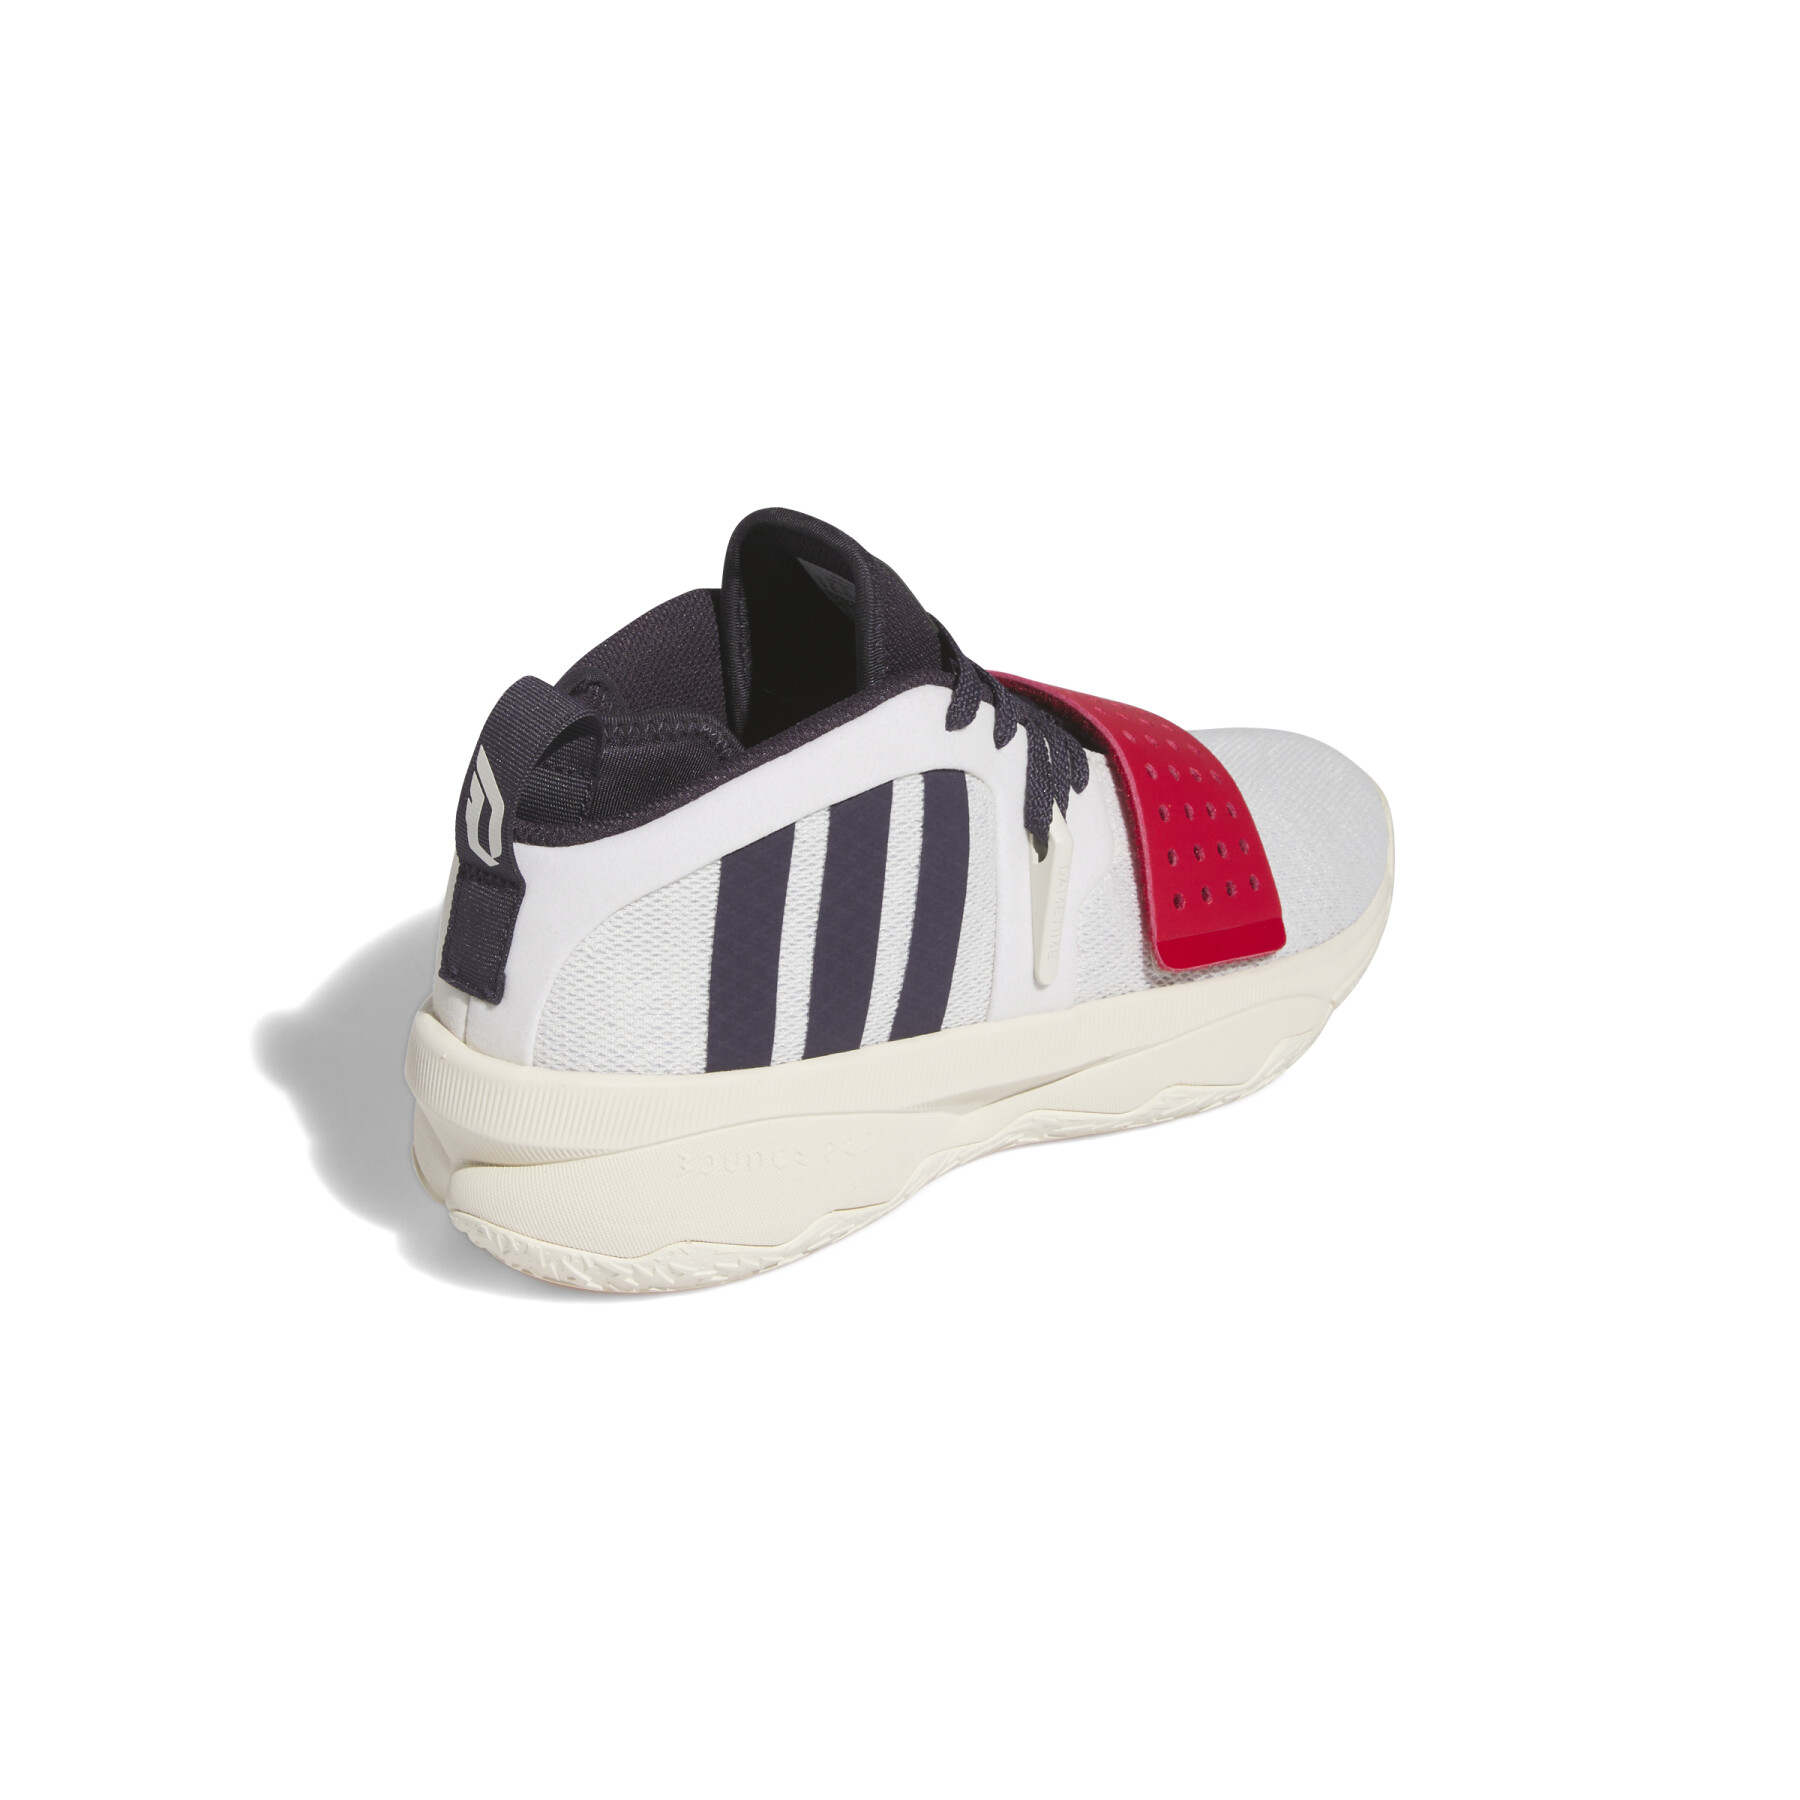 Indoor Sports Shoes adidas 8 Extply